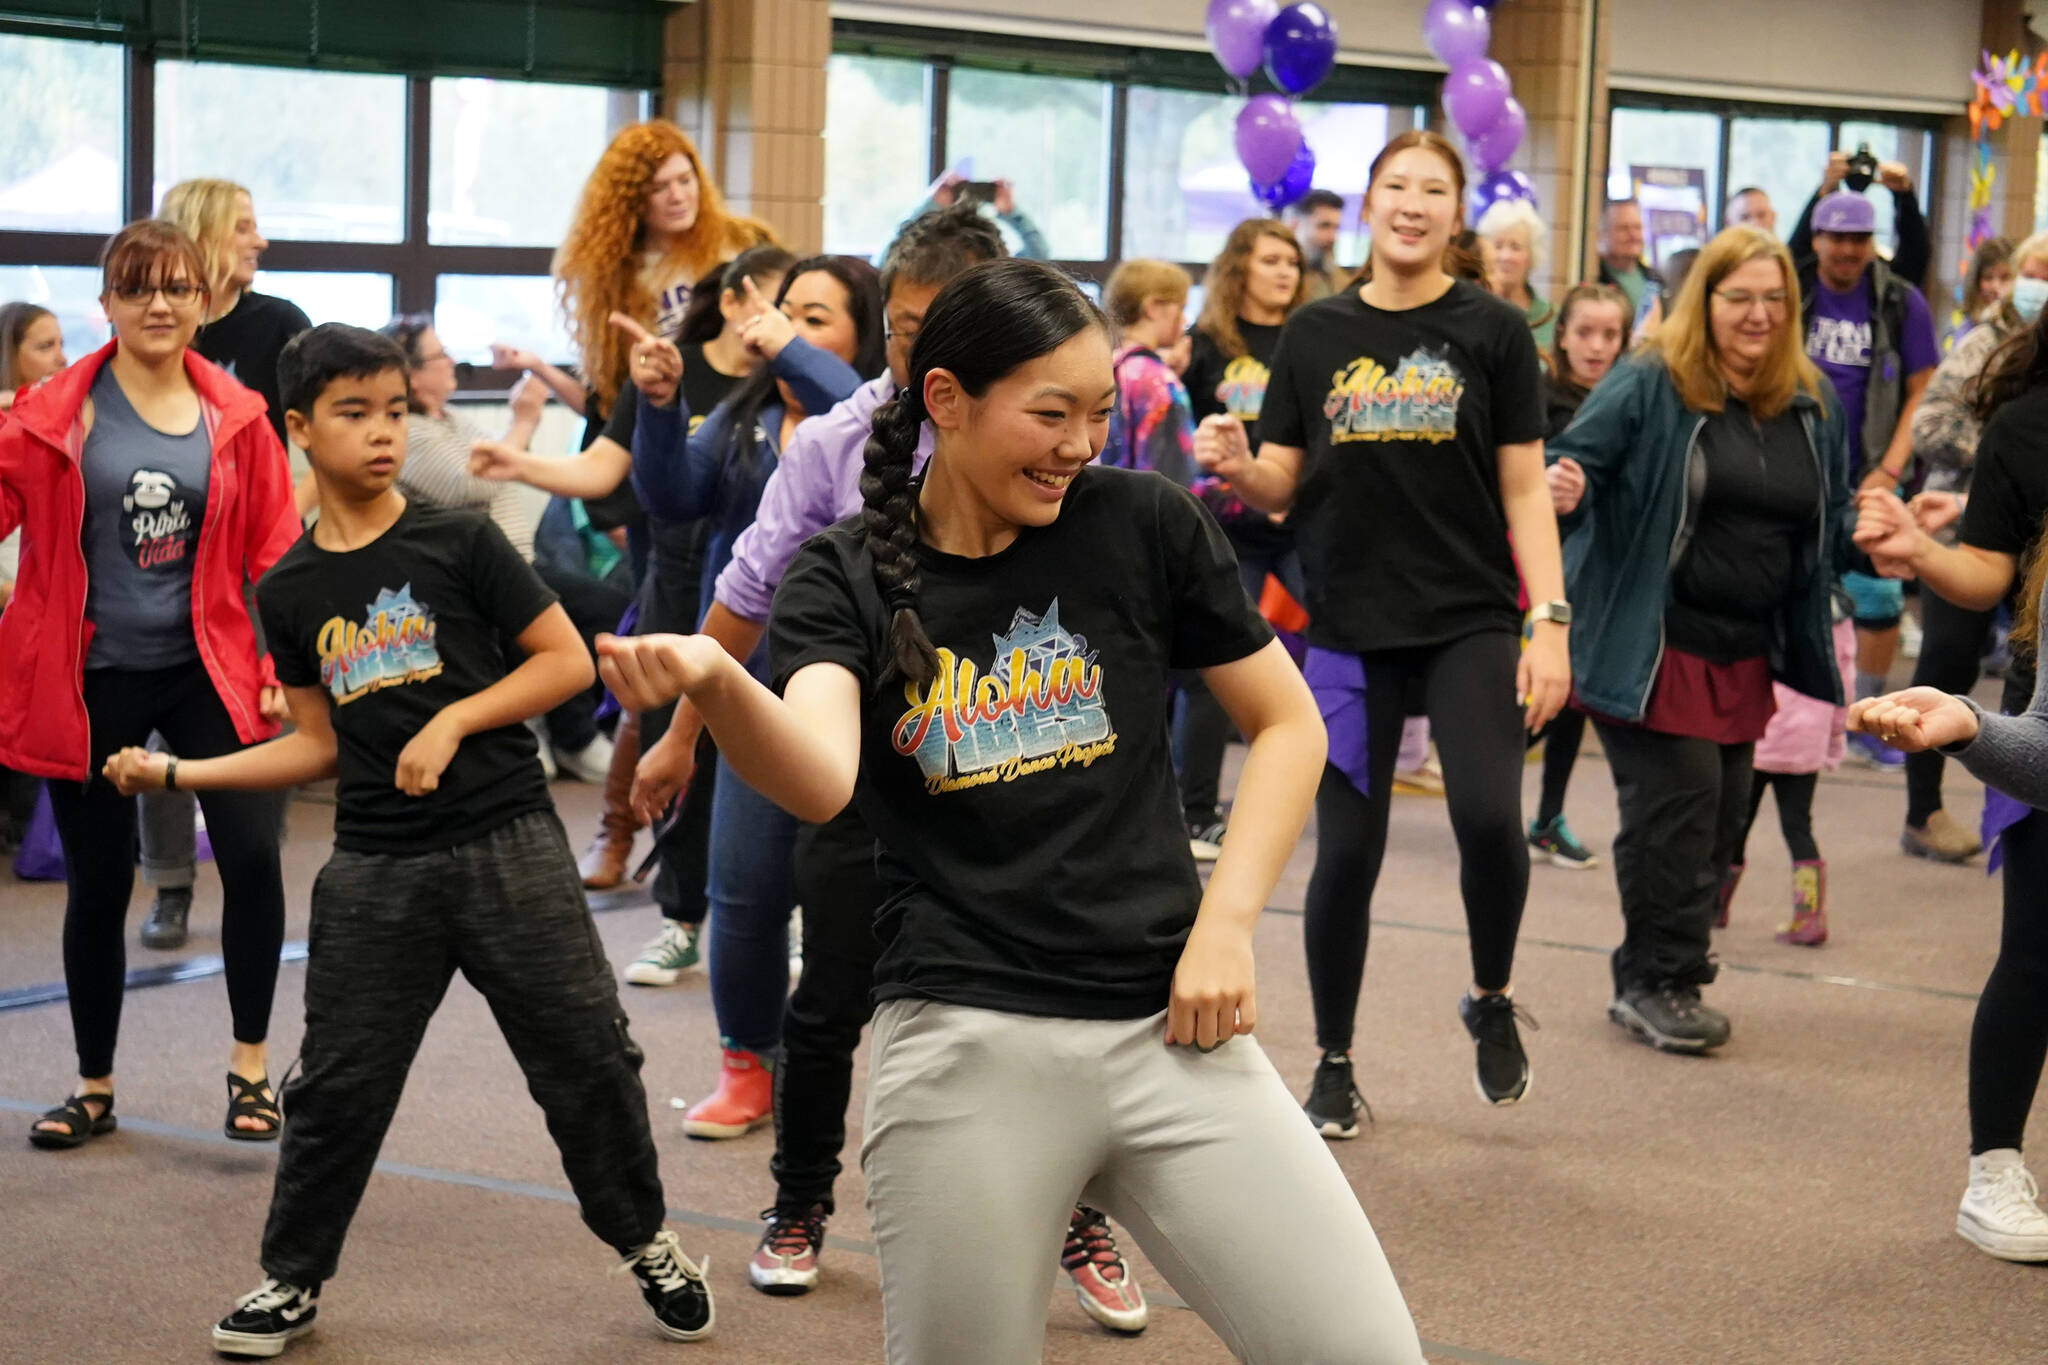 Dancers from the Diamond Dance Project perform ahead of the Walk to End Alzheimer’s at the Soldotna Regional Sports Complex in Soldotna, Alaska, on Saturday, Sept. 16, 2023. (Jake Dye/Peninsula Clarion)